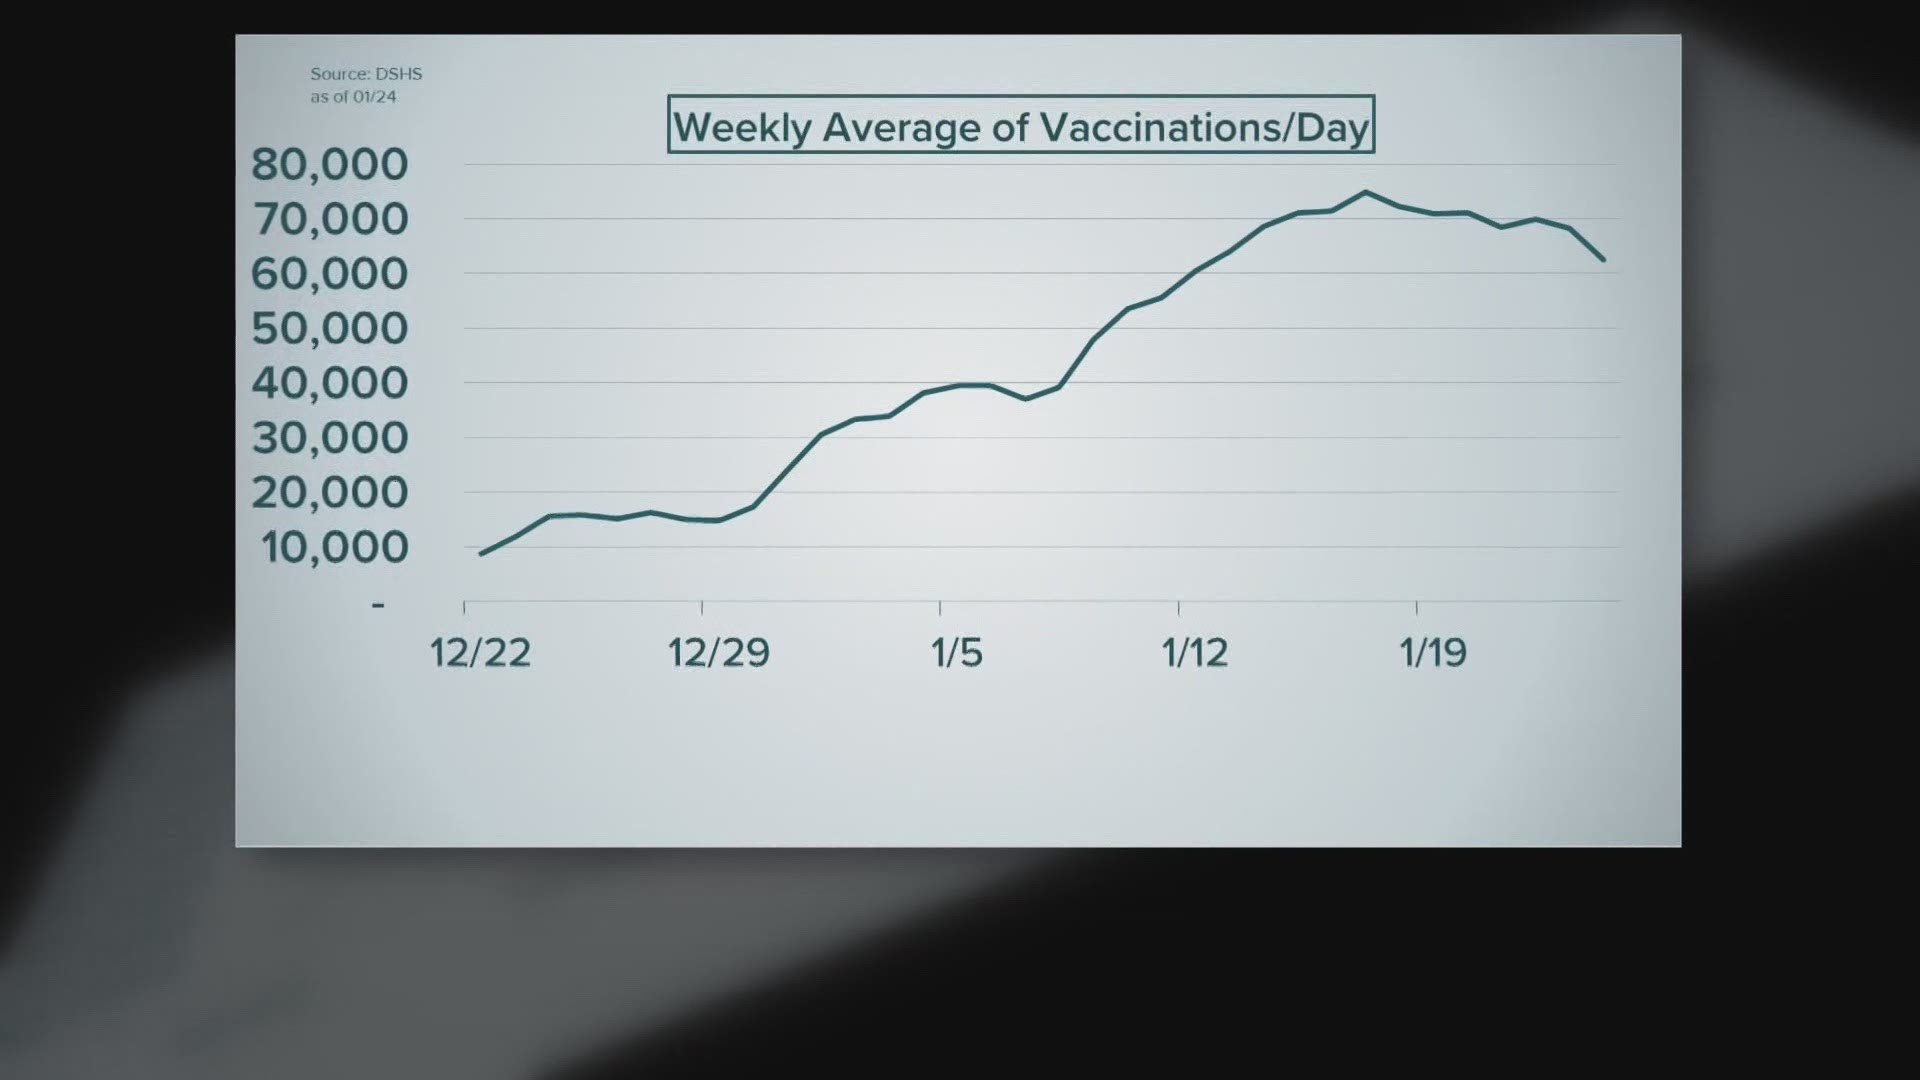 At the current rate, it would take more than a year to vaccinate the state.